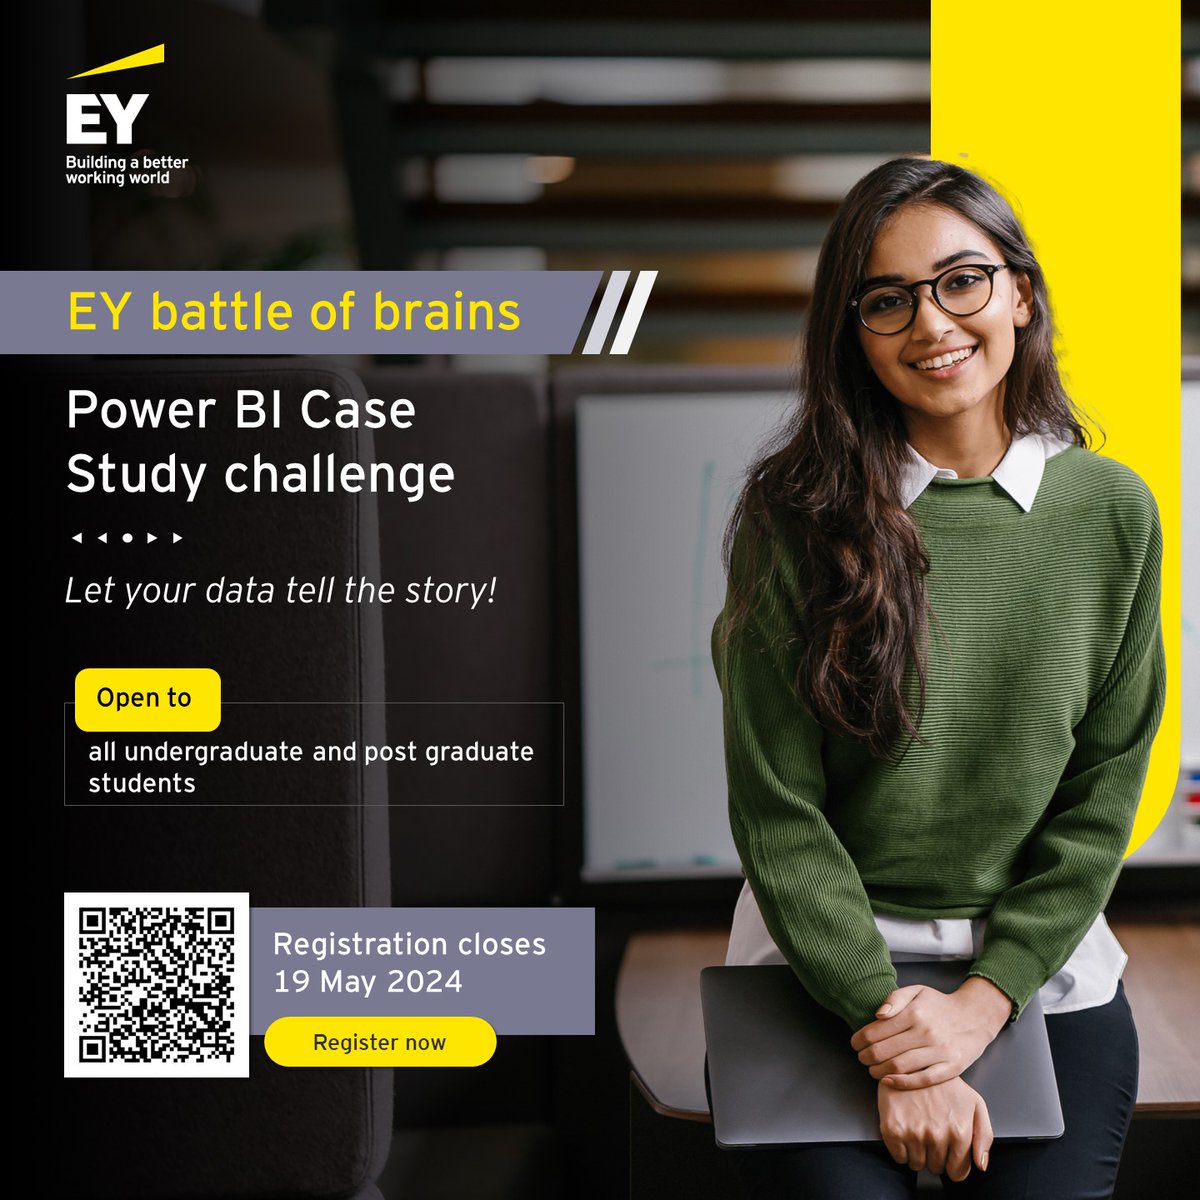 Dive into the Battle of Brains - Power BI Case Study Challenge and demonstrate your analytical expertise. Don't miss out—the deadline to register is 19 May 2024. Join now:
go.ey.com/4droY5e
#BetterWorkingWorld #EYVirtualAcademy